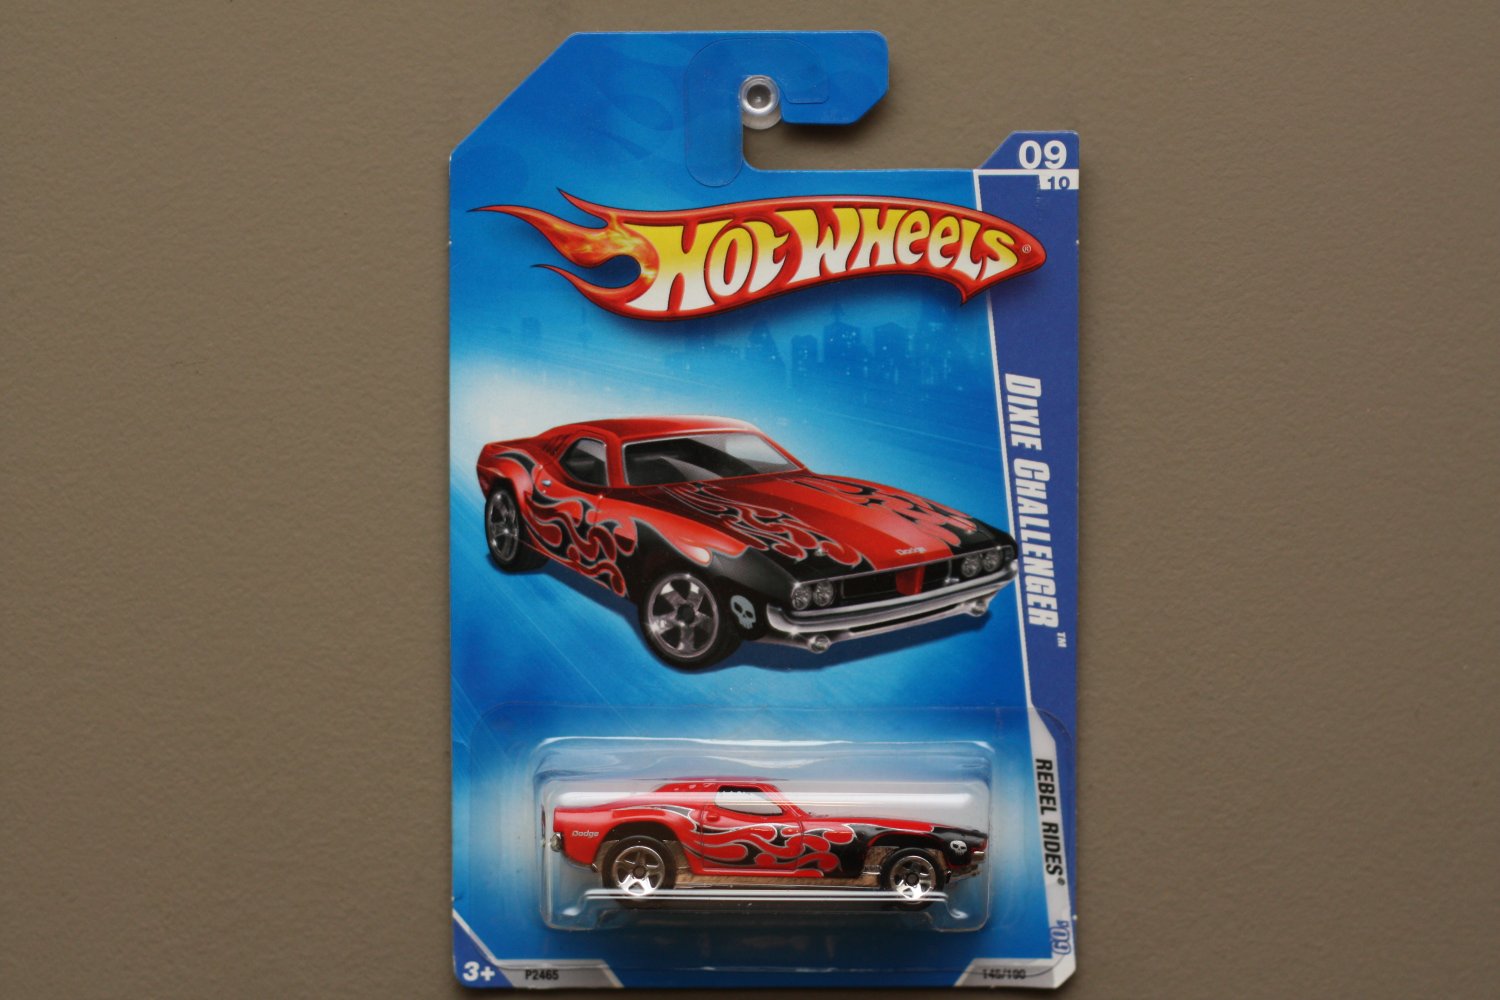 Hot Wheels 2009 Rebel Rides Dixie Challenger (red) (SEE CONDITION) .